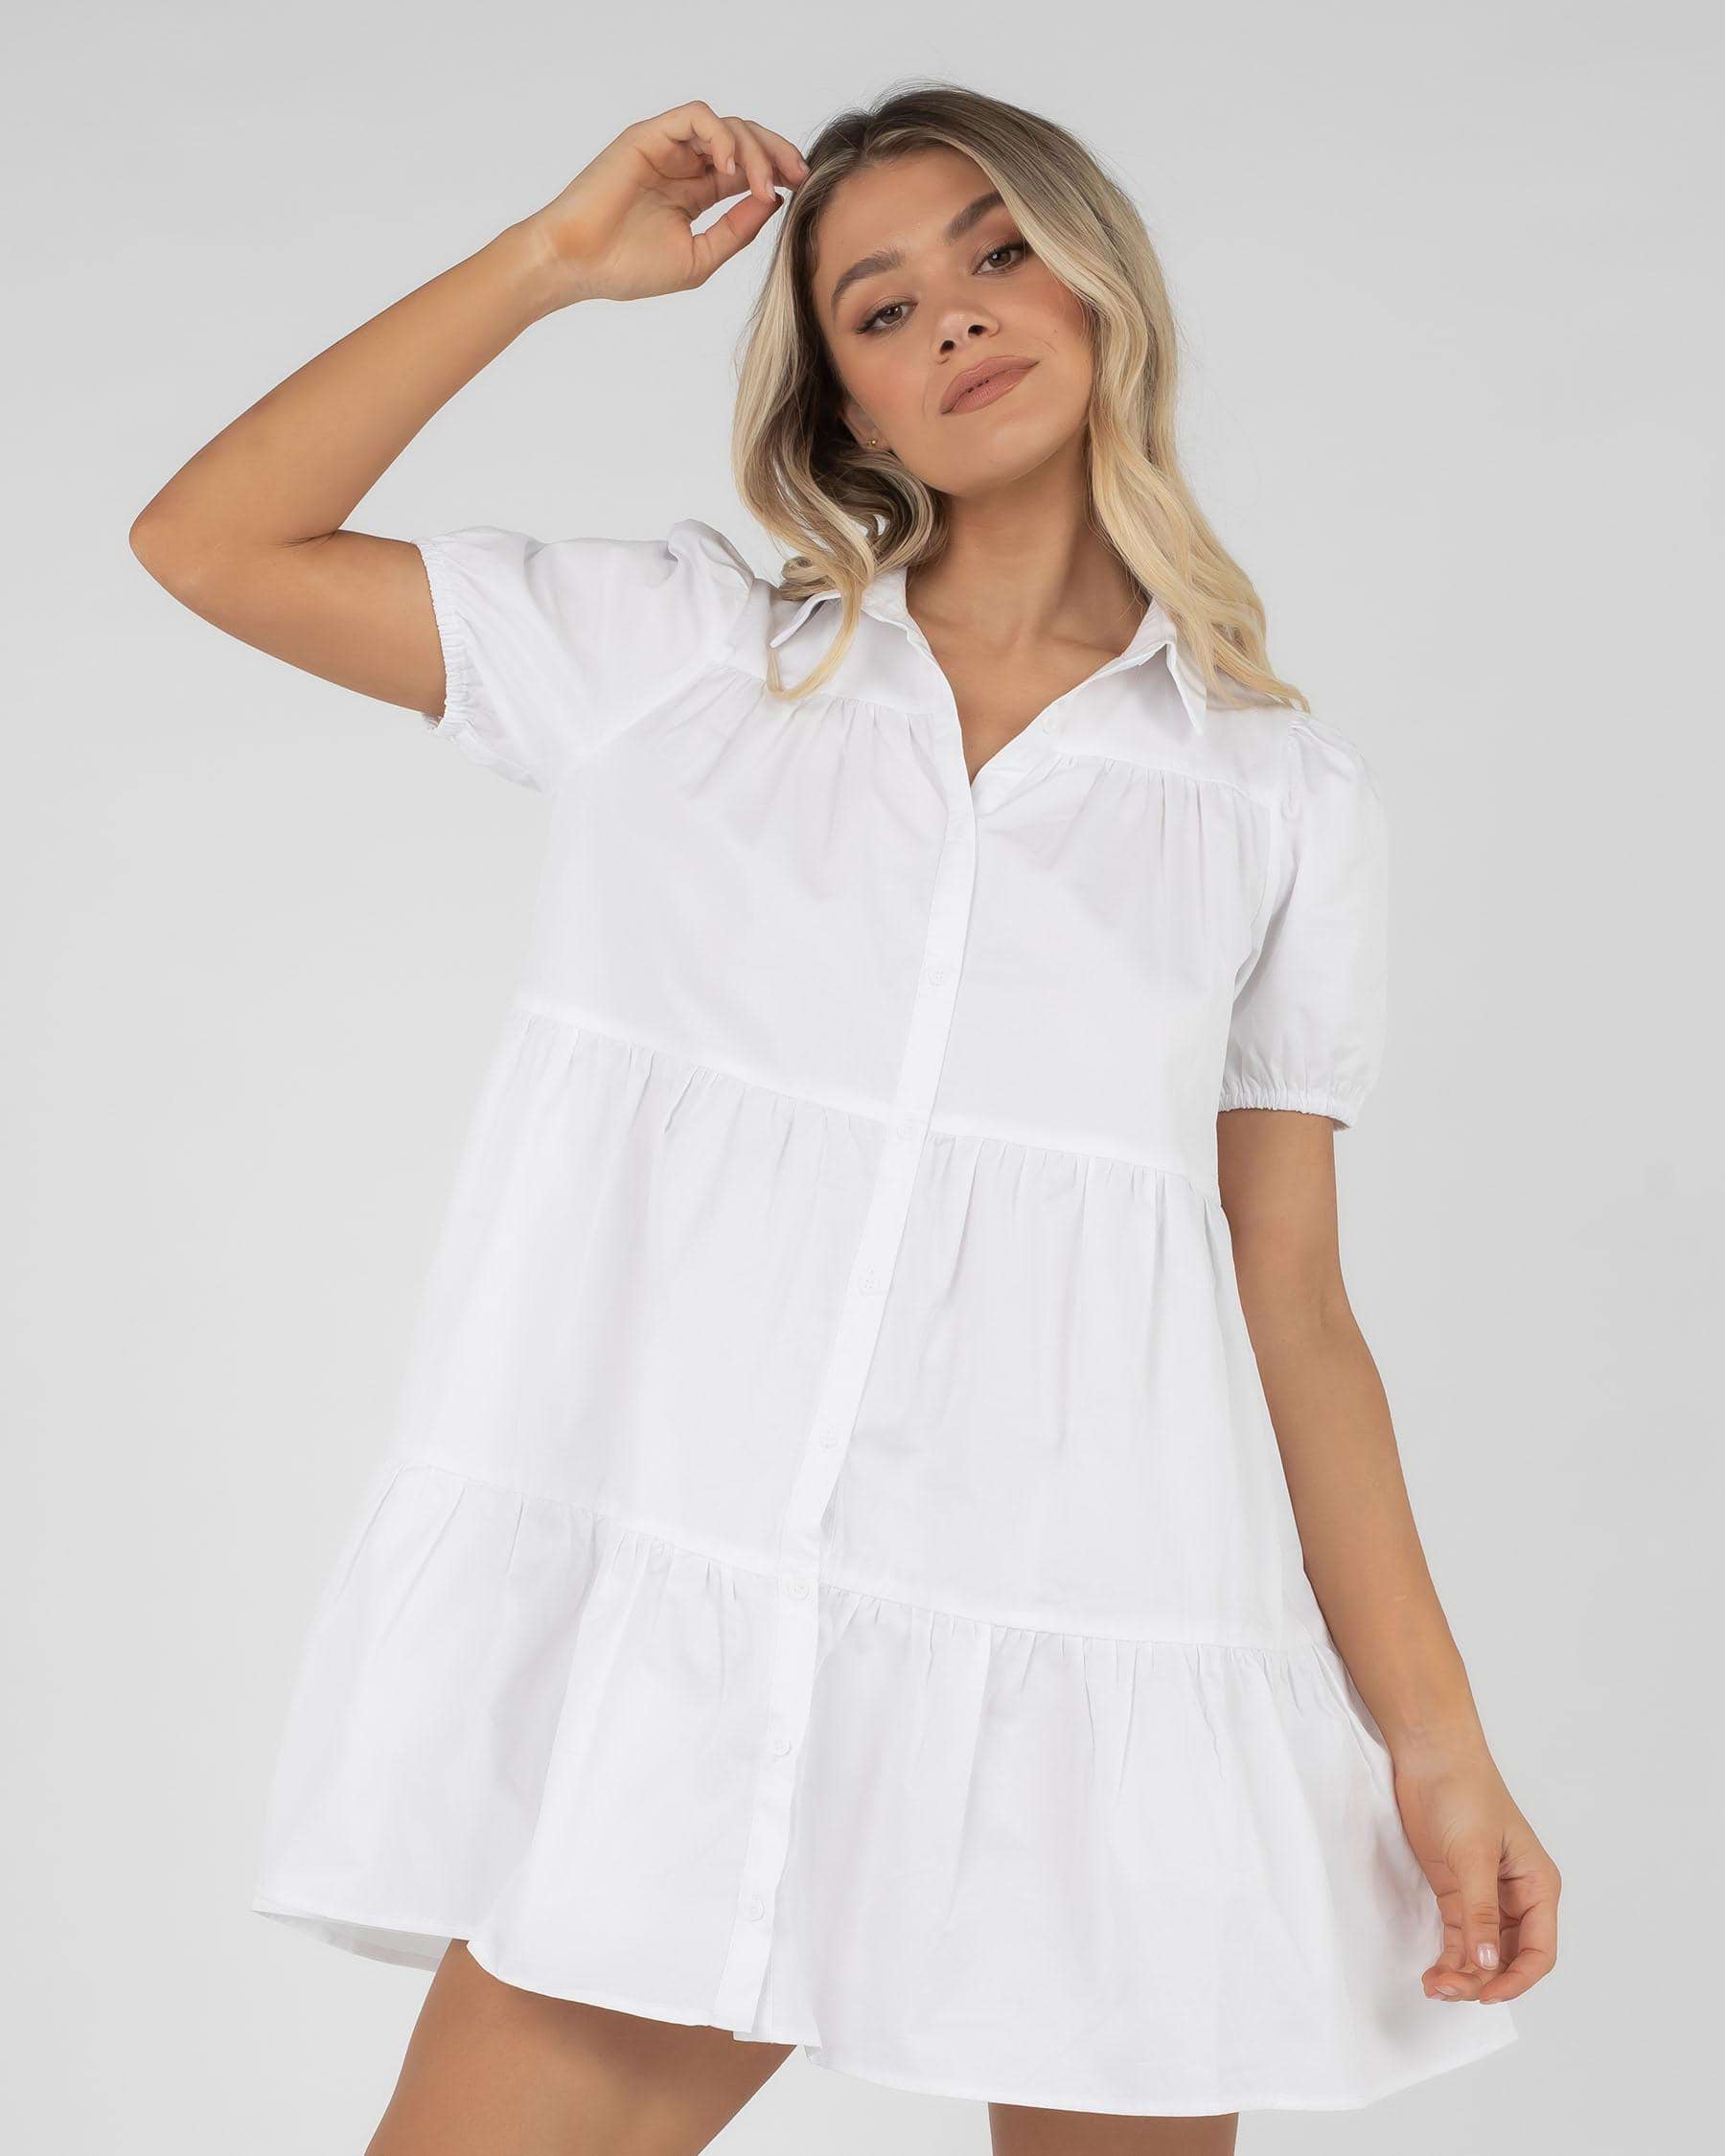 Ava And Ever Cupid Dress In White - Fast Shipping & Easy Returns - City ...